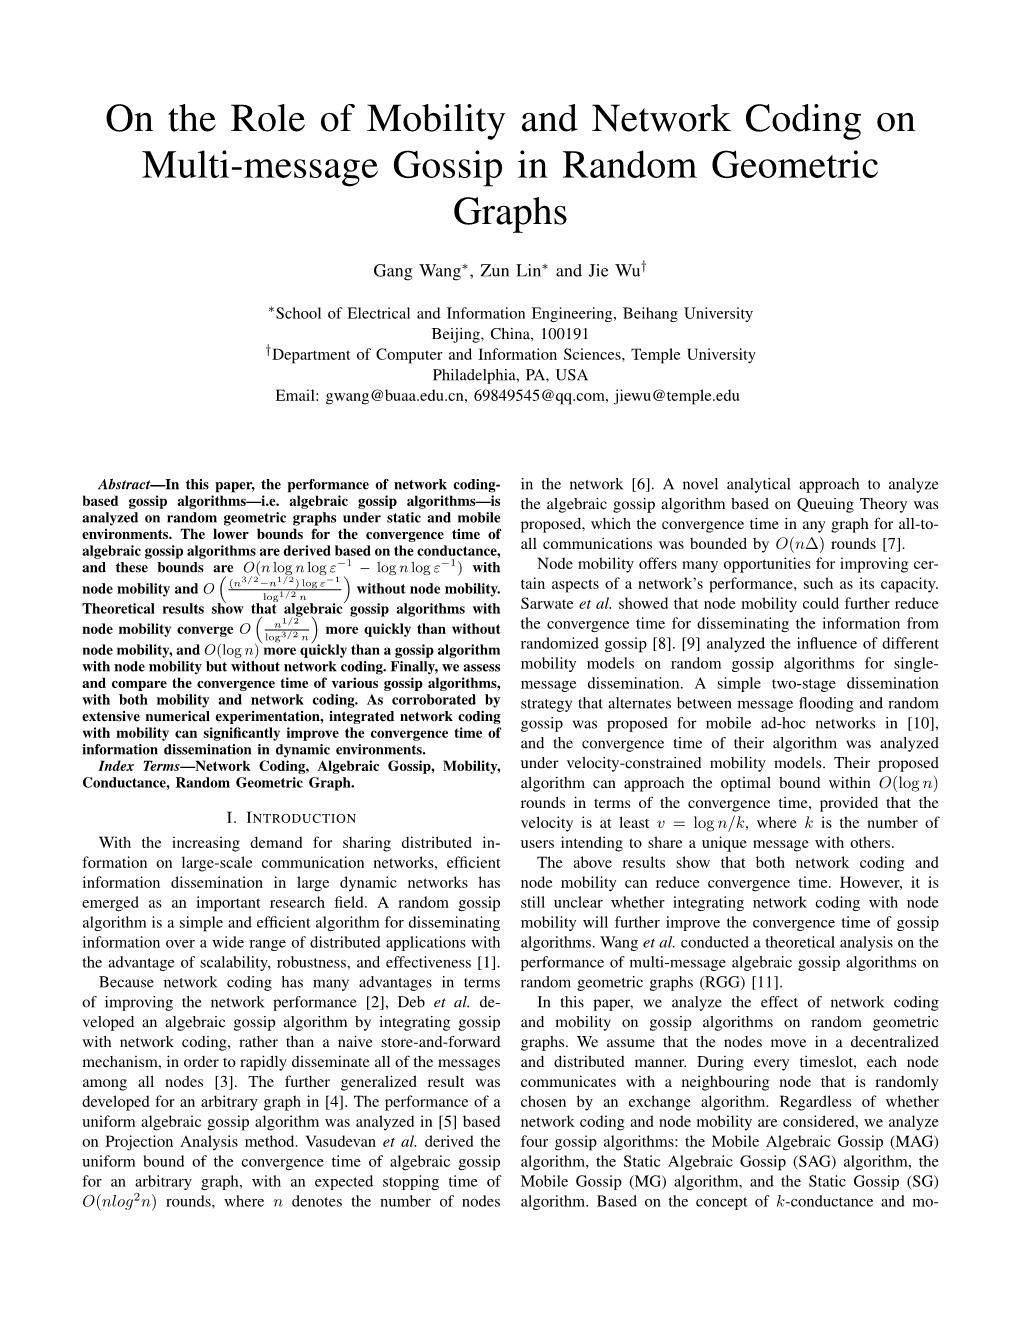 On the Role of Mobility and Network Coding on Multi-Message Gossip in Random Geometric Graphs